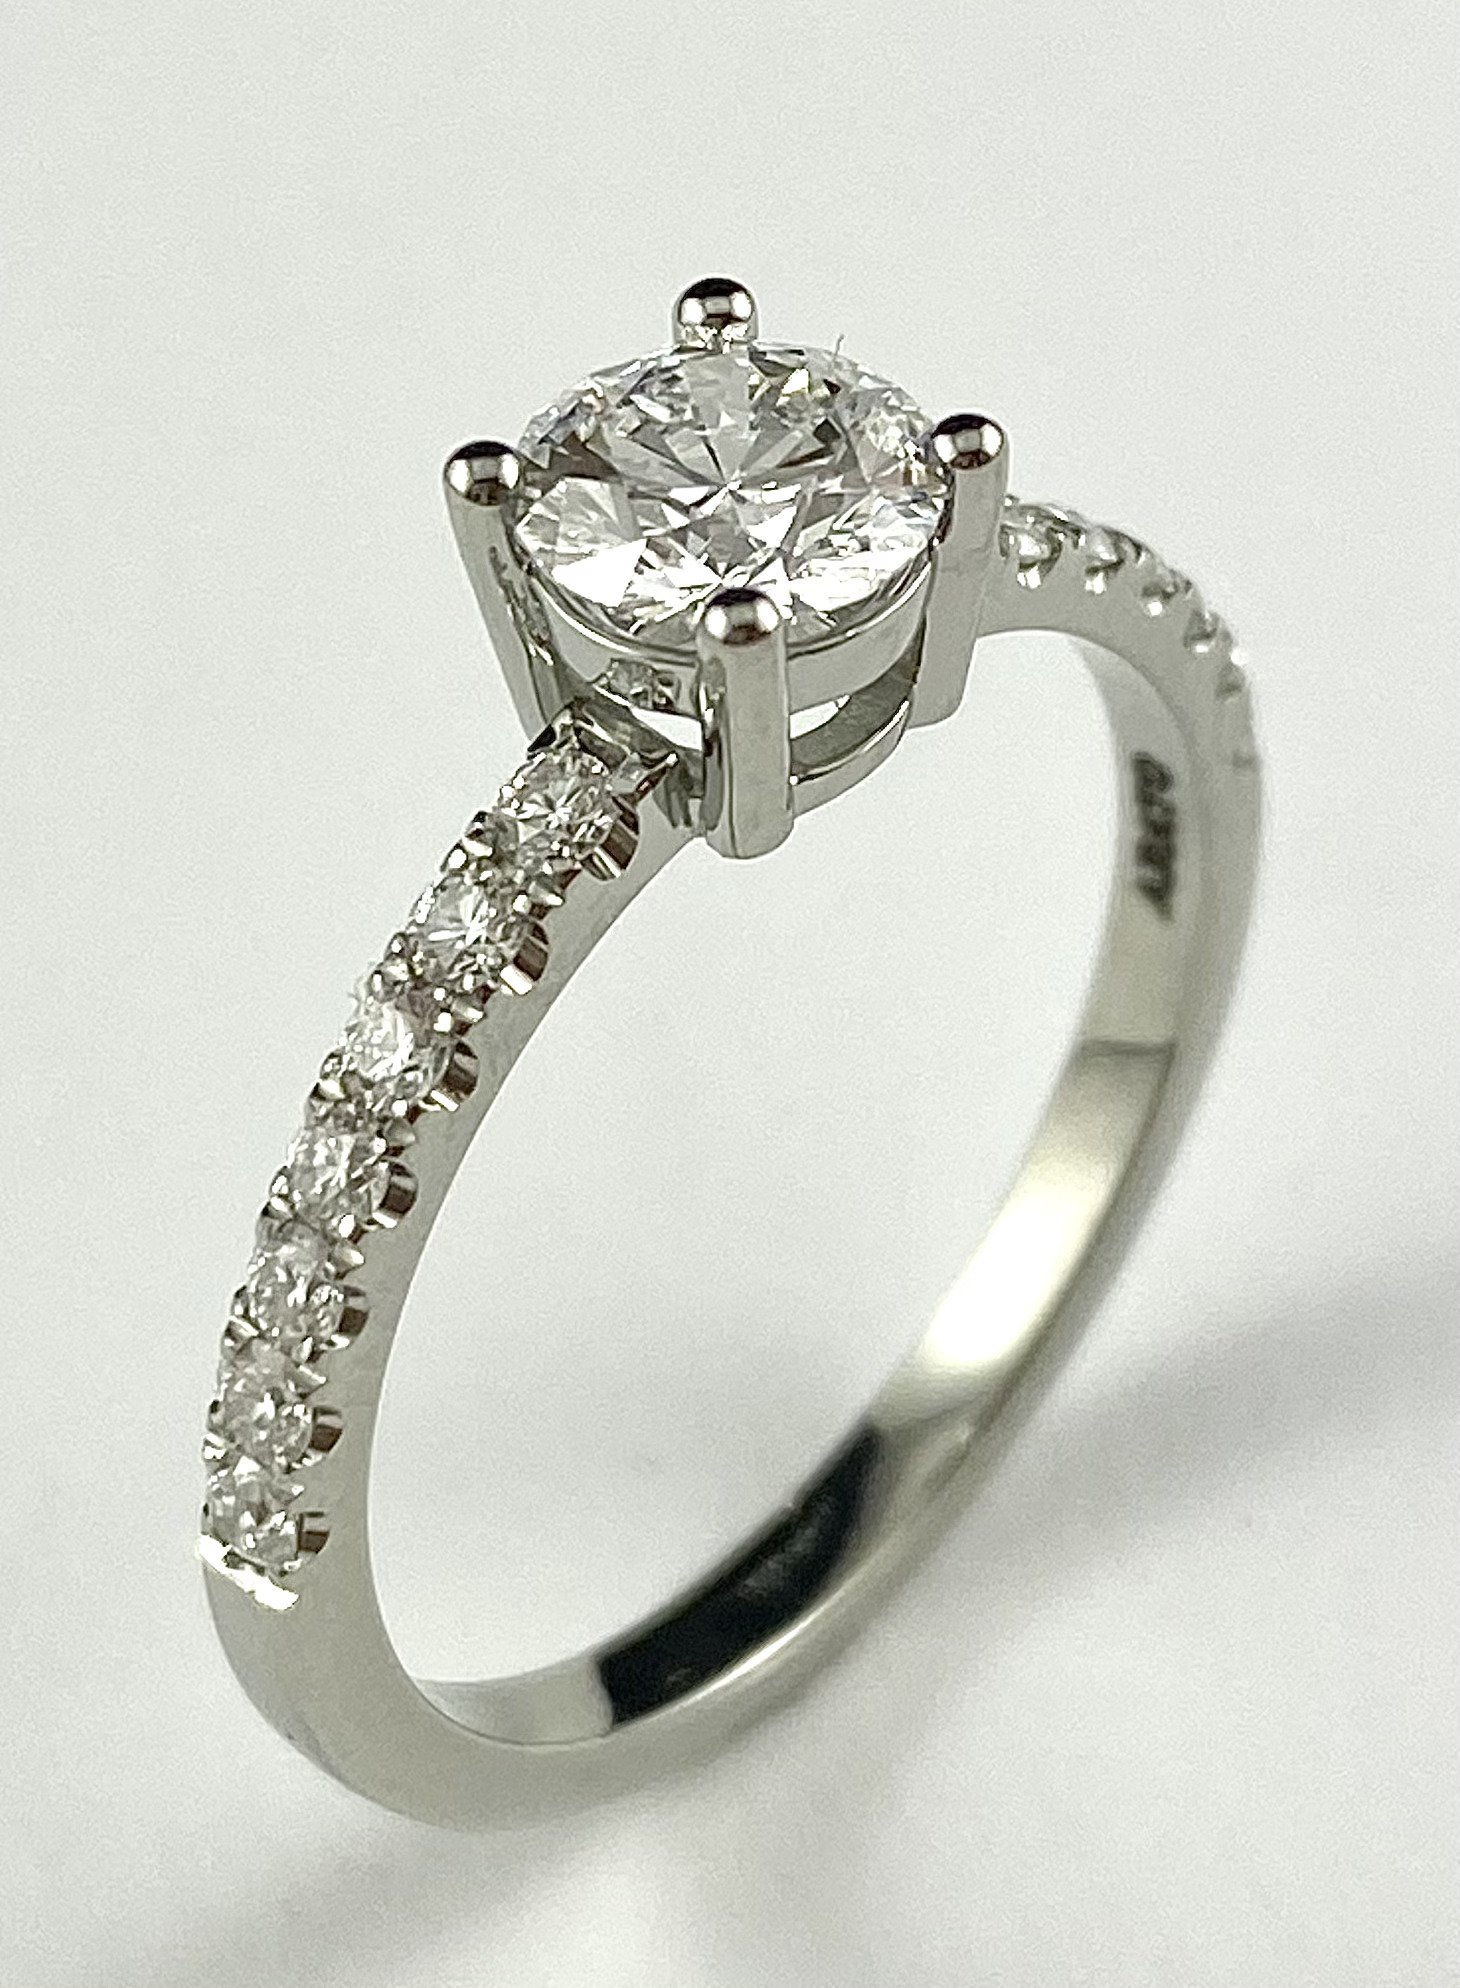 19K White Gold Diamond Ring (Center Diamond with Pave Shoulders)